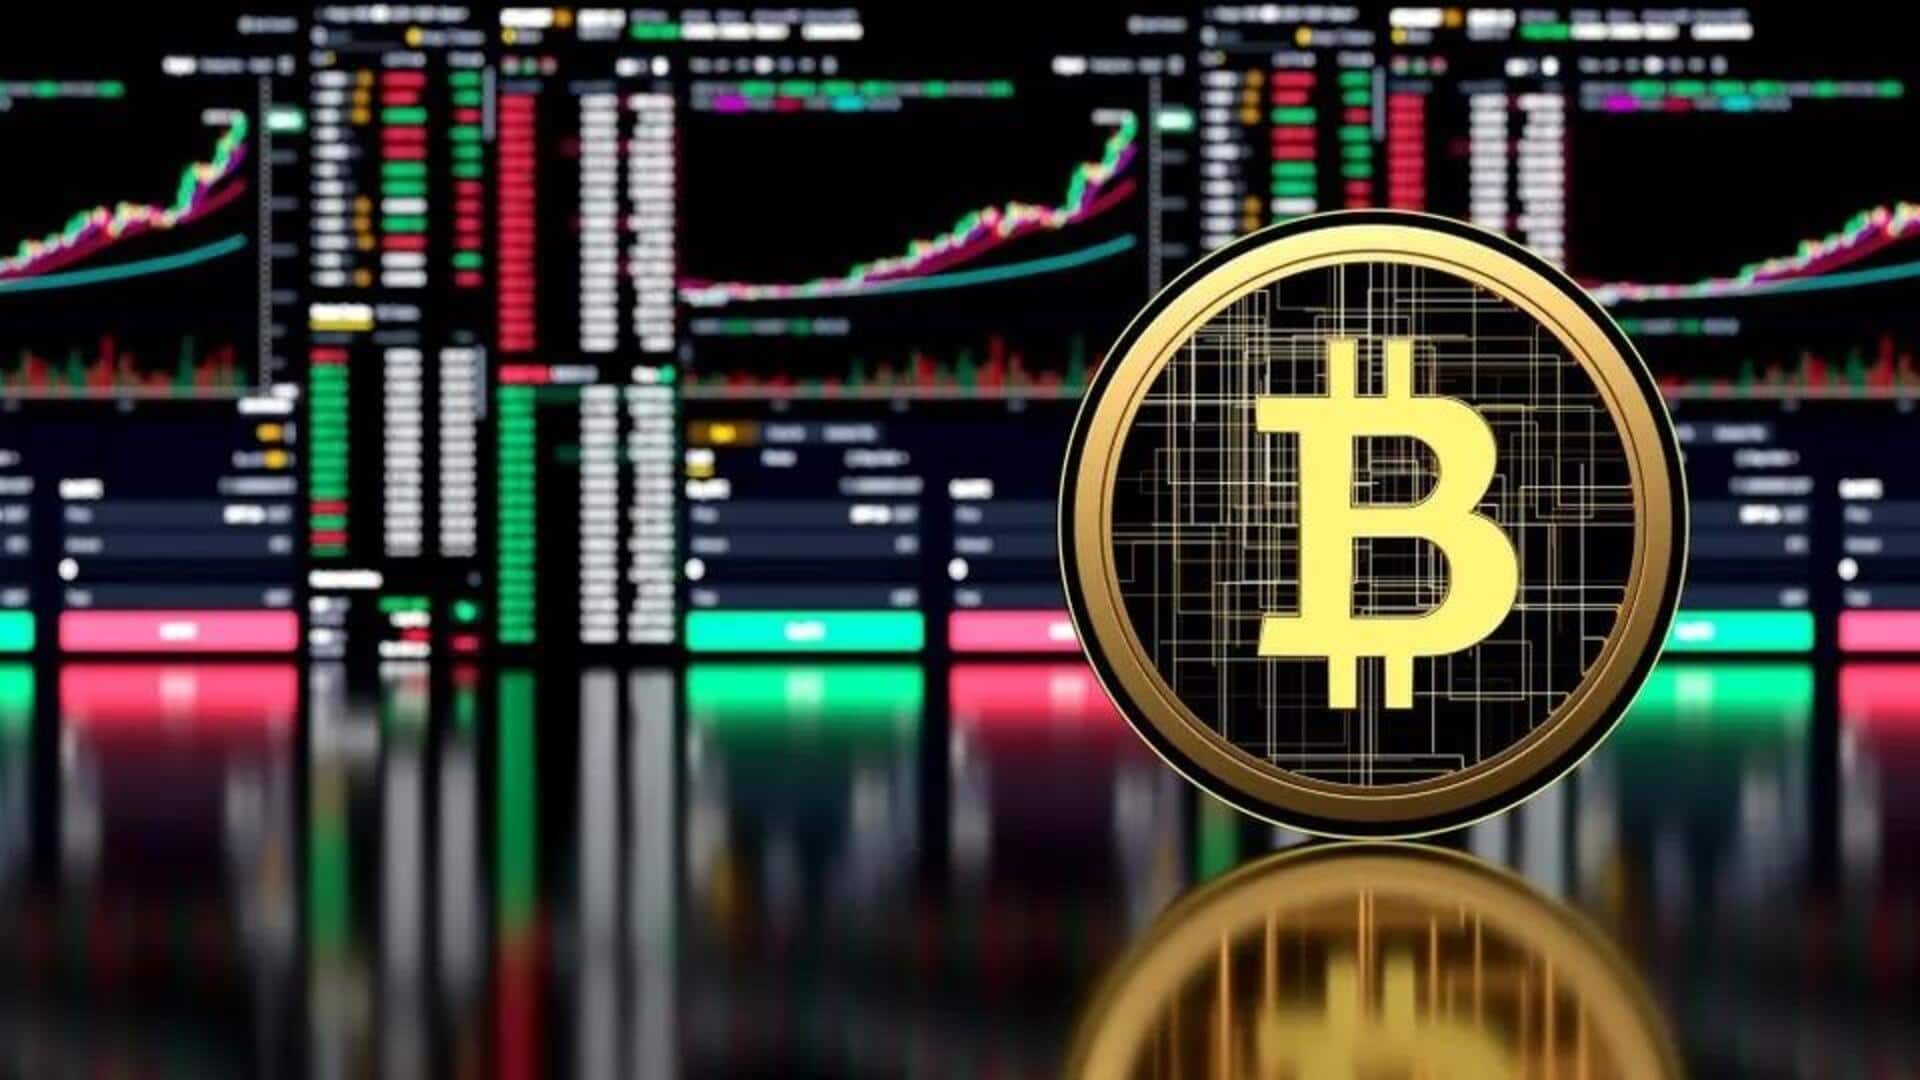 Today's cryptocurrency prices: Check rates of Bitcoin, Dogecoin, Tether, BNB